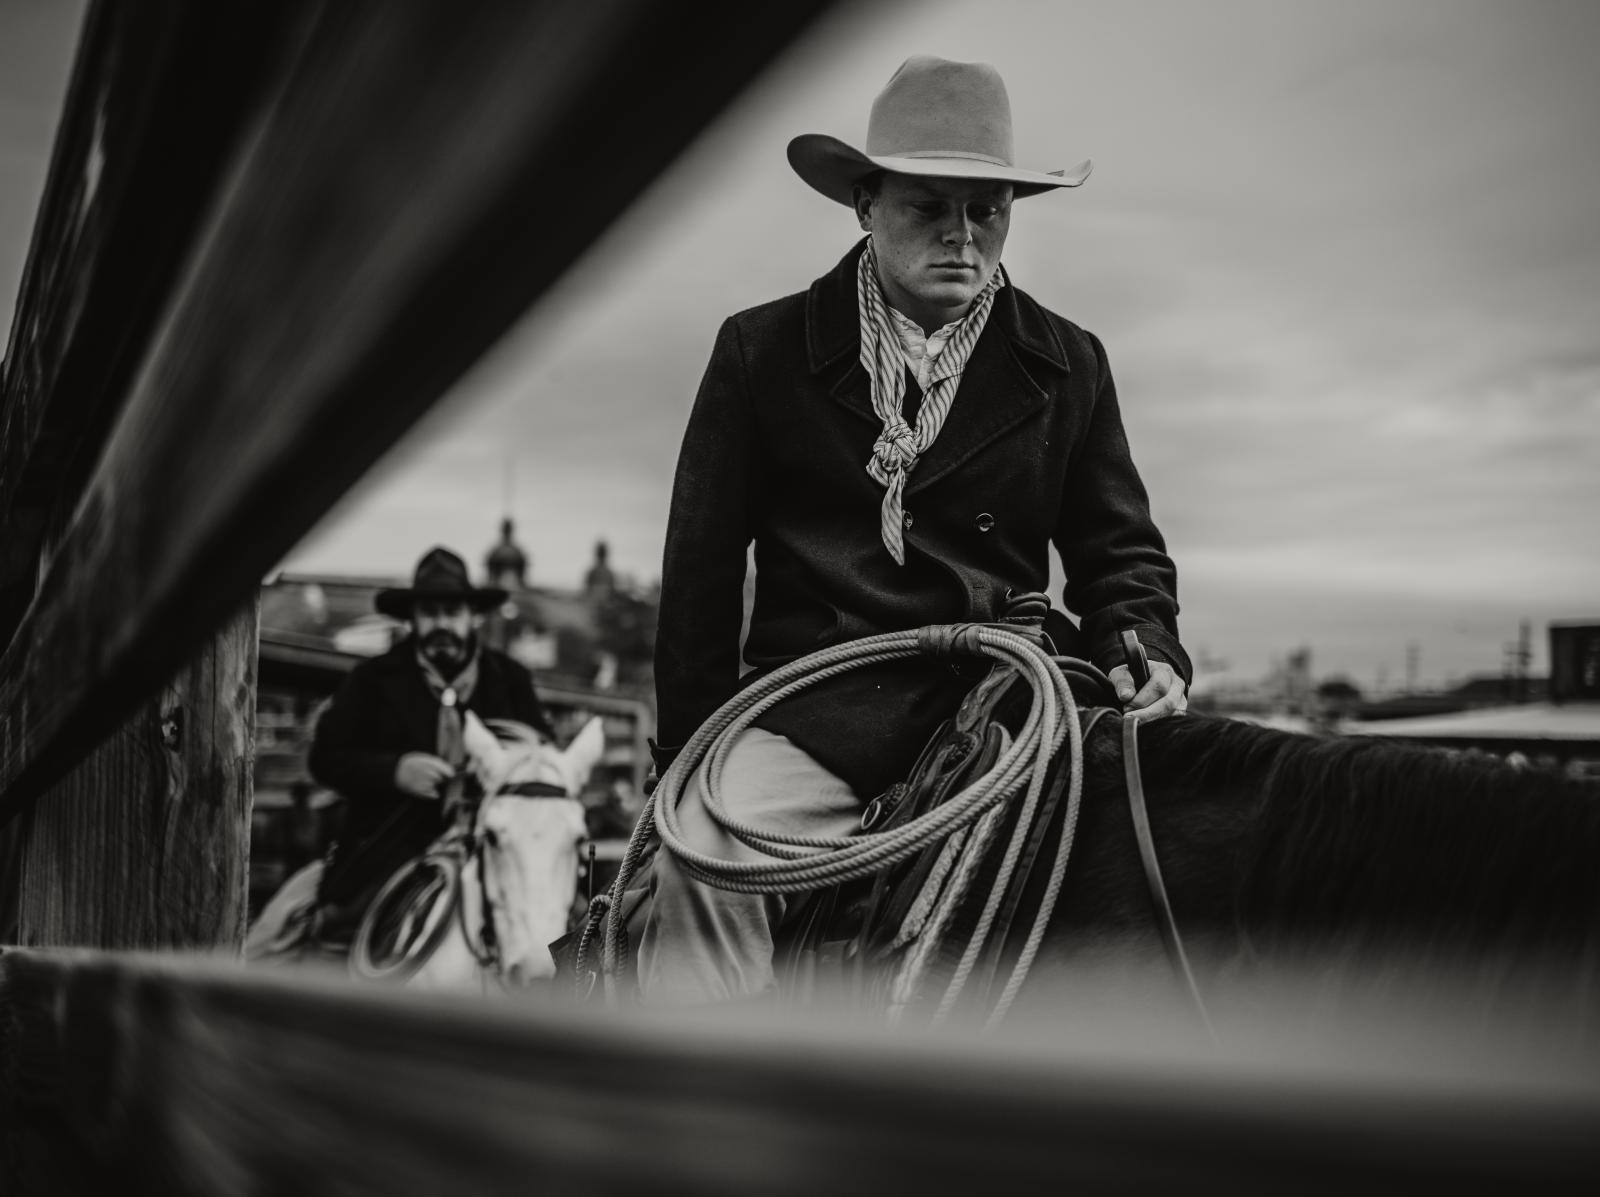 Cattle Drive | Buy this image